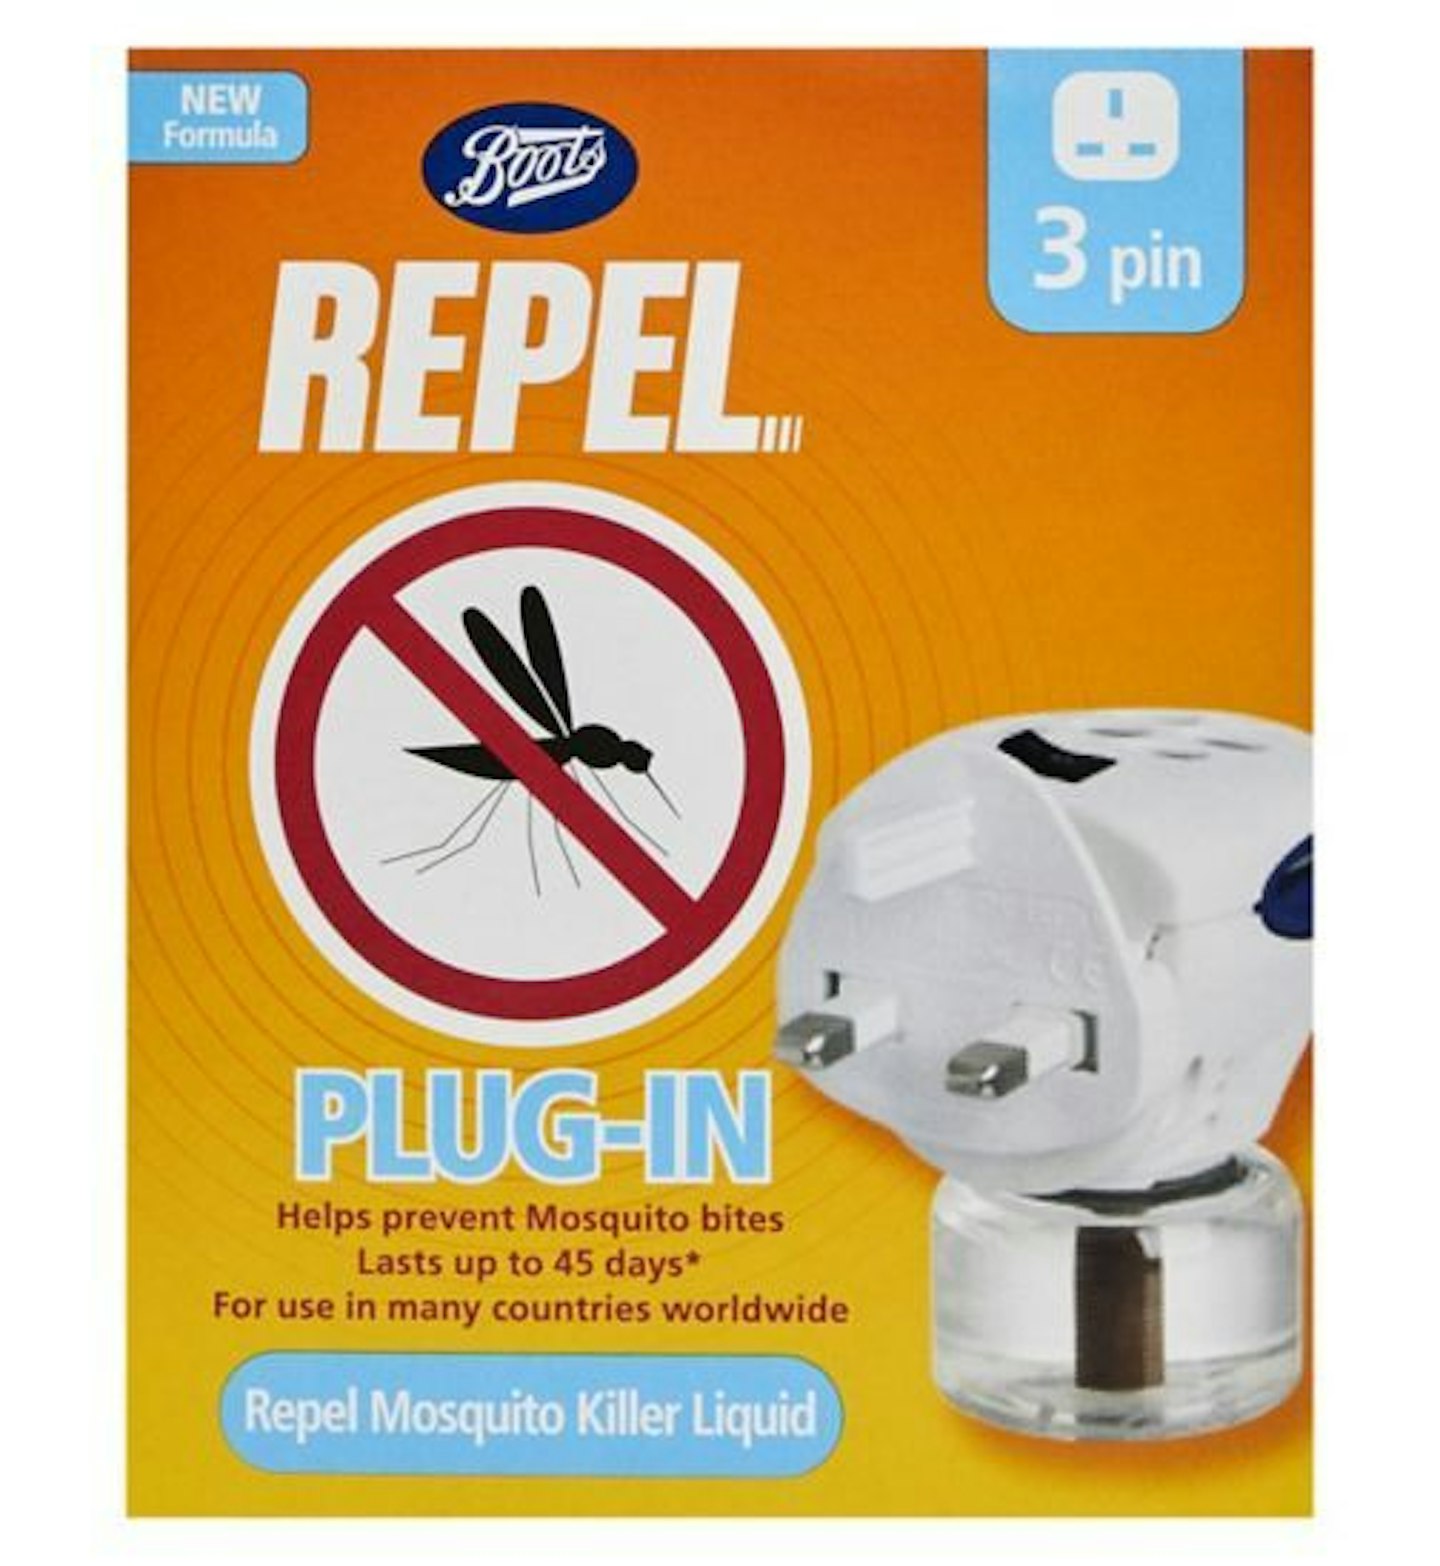 best insect repellents Boots Repel Mosquito Killer 3 Pin Plug-In